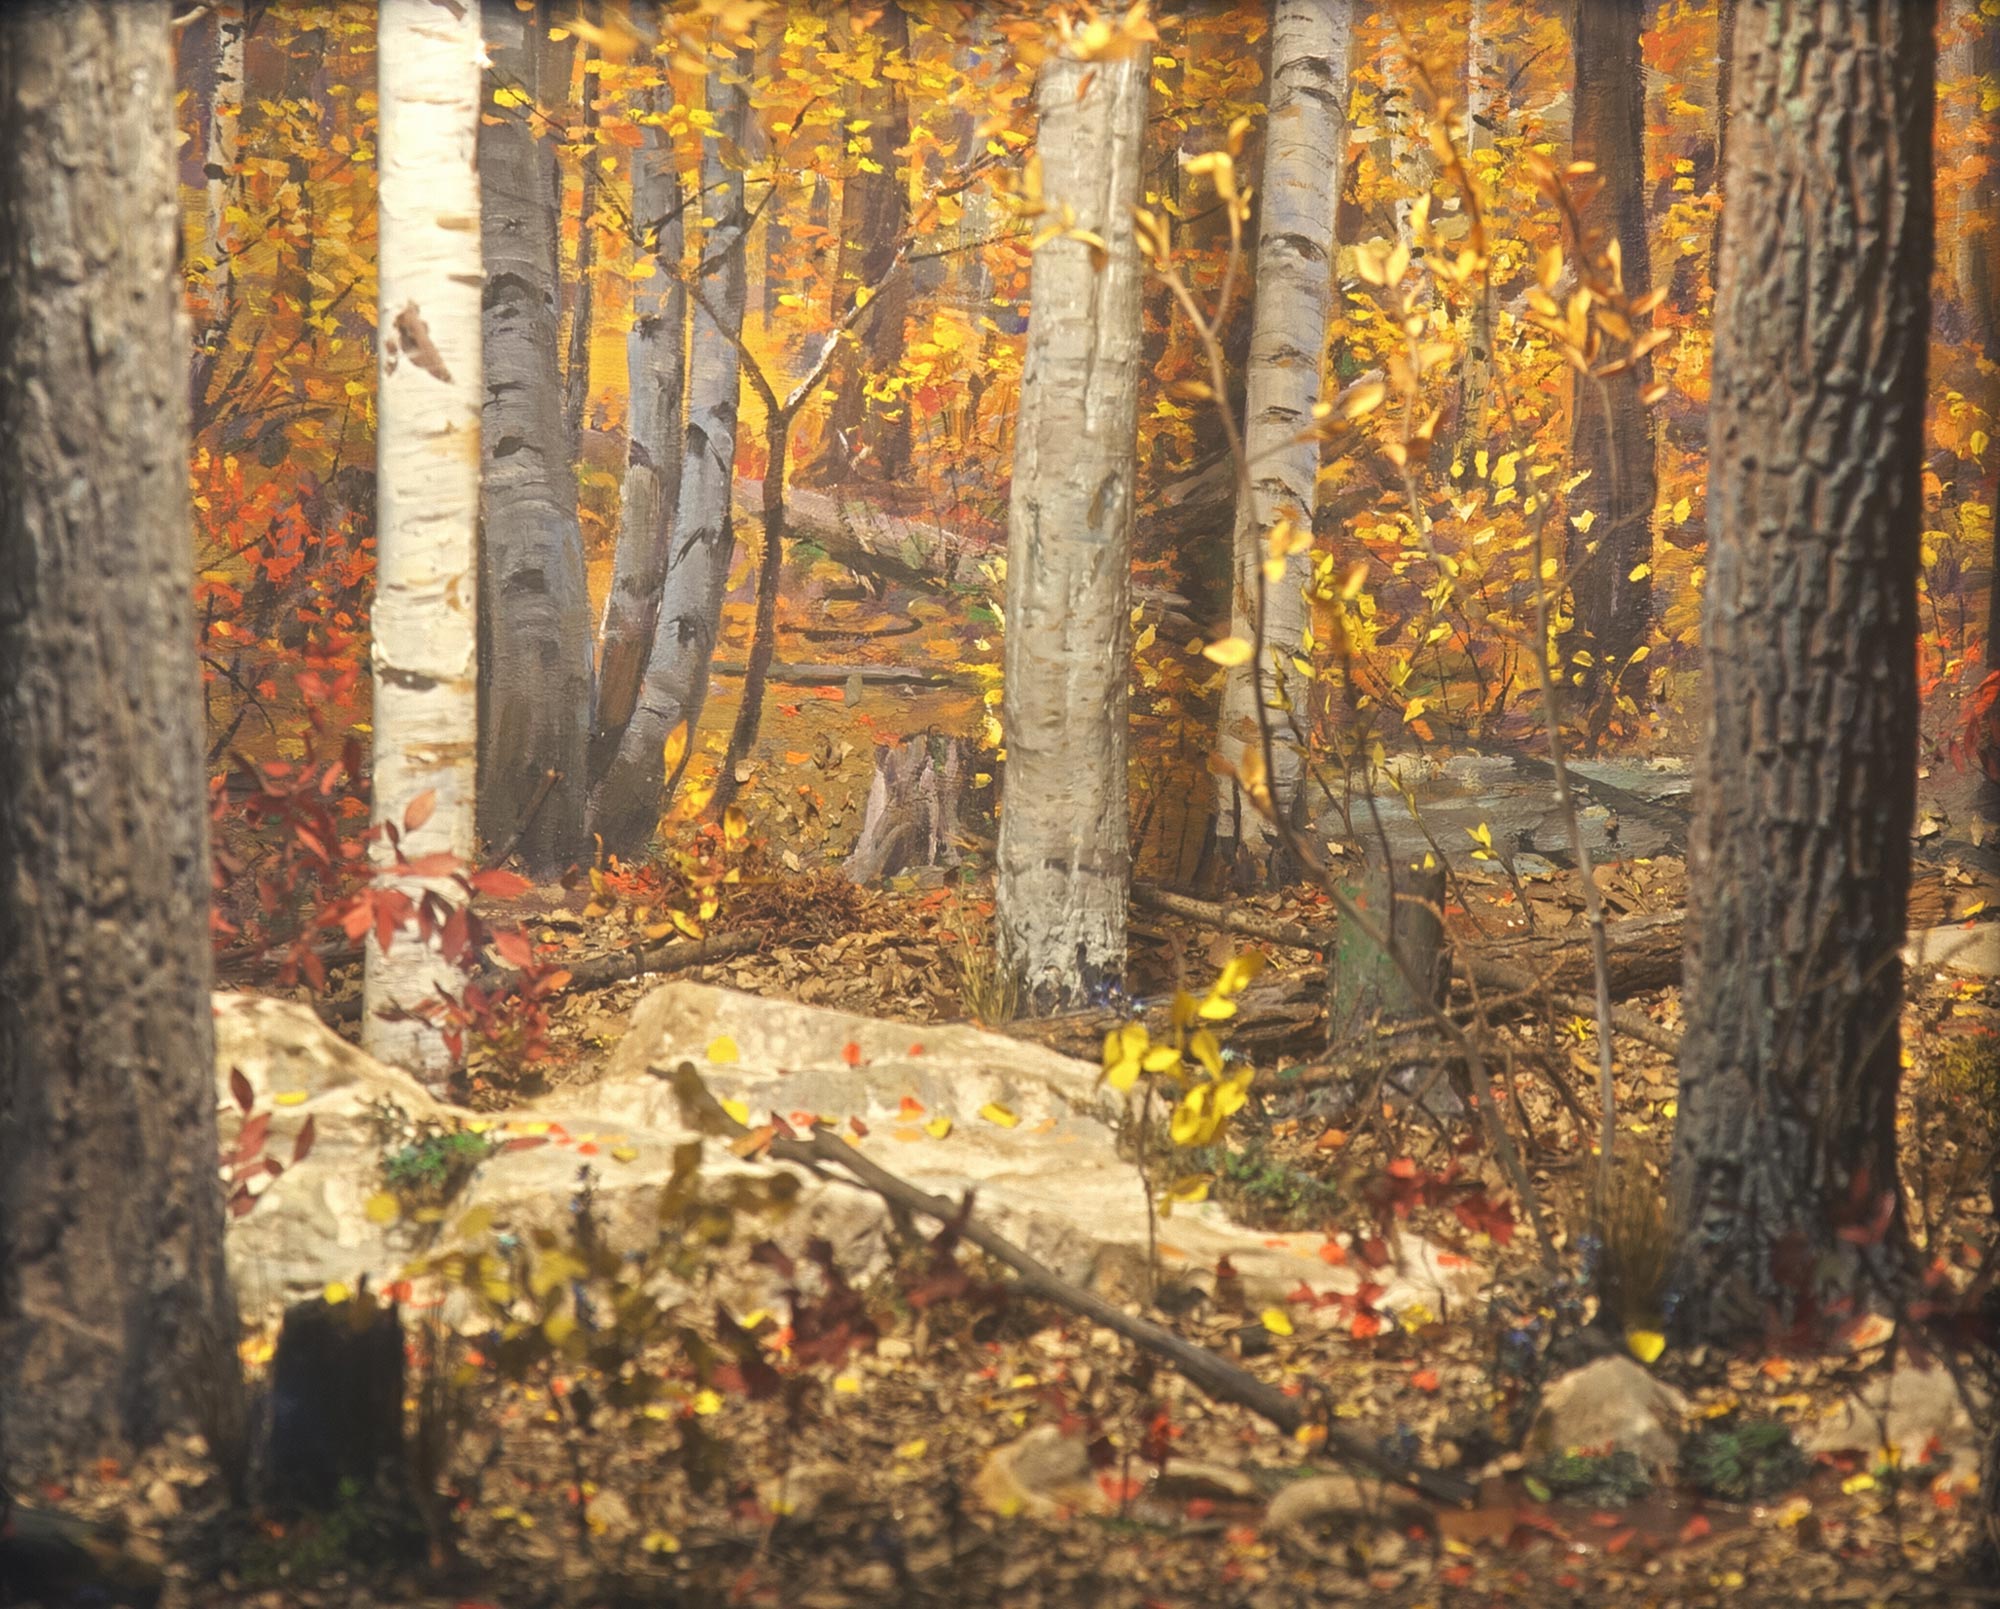 Diorama showing the woods in the fall.